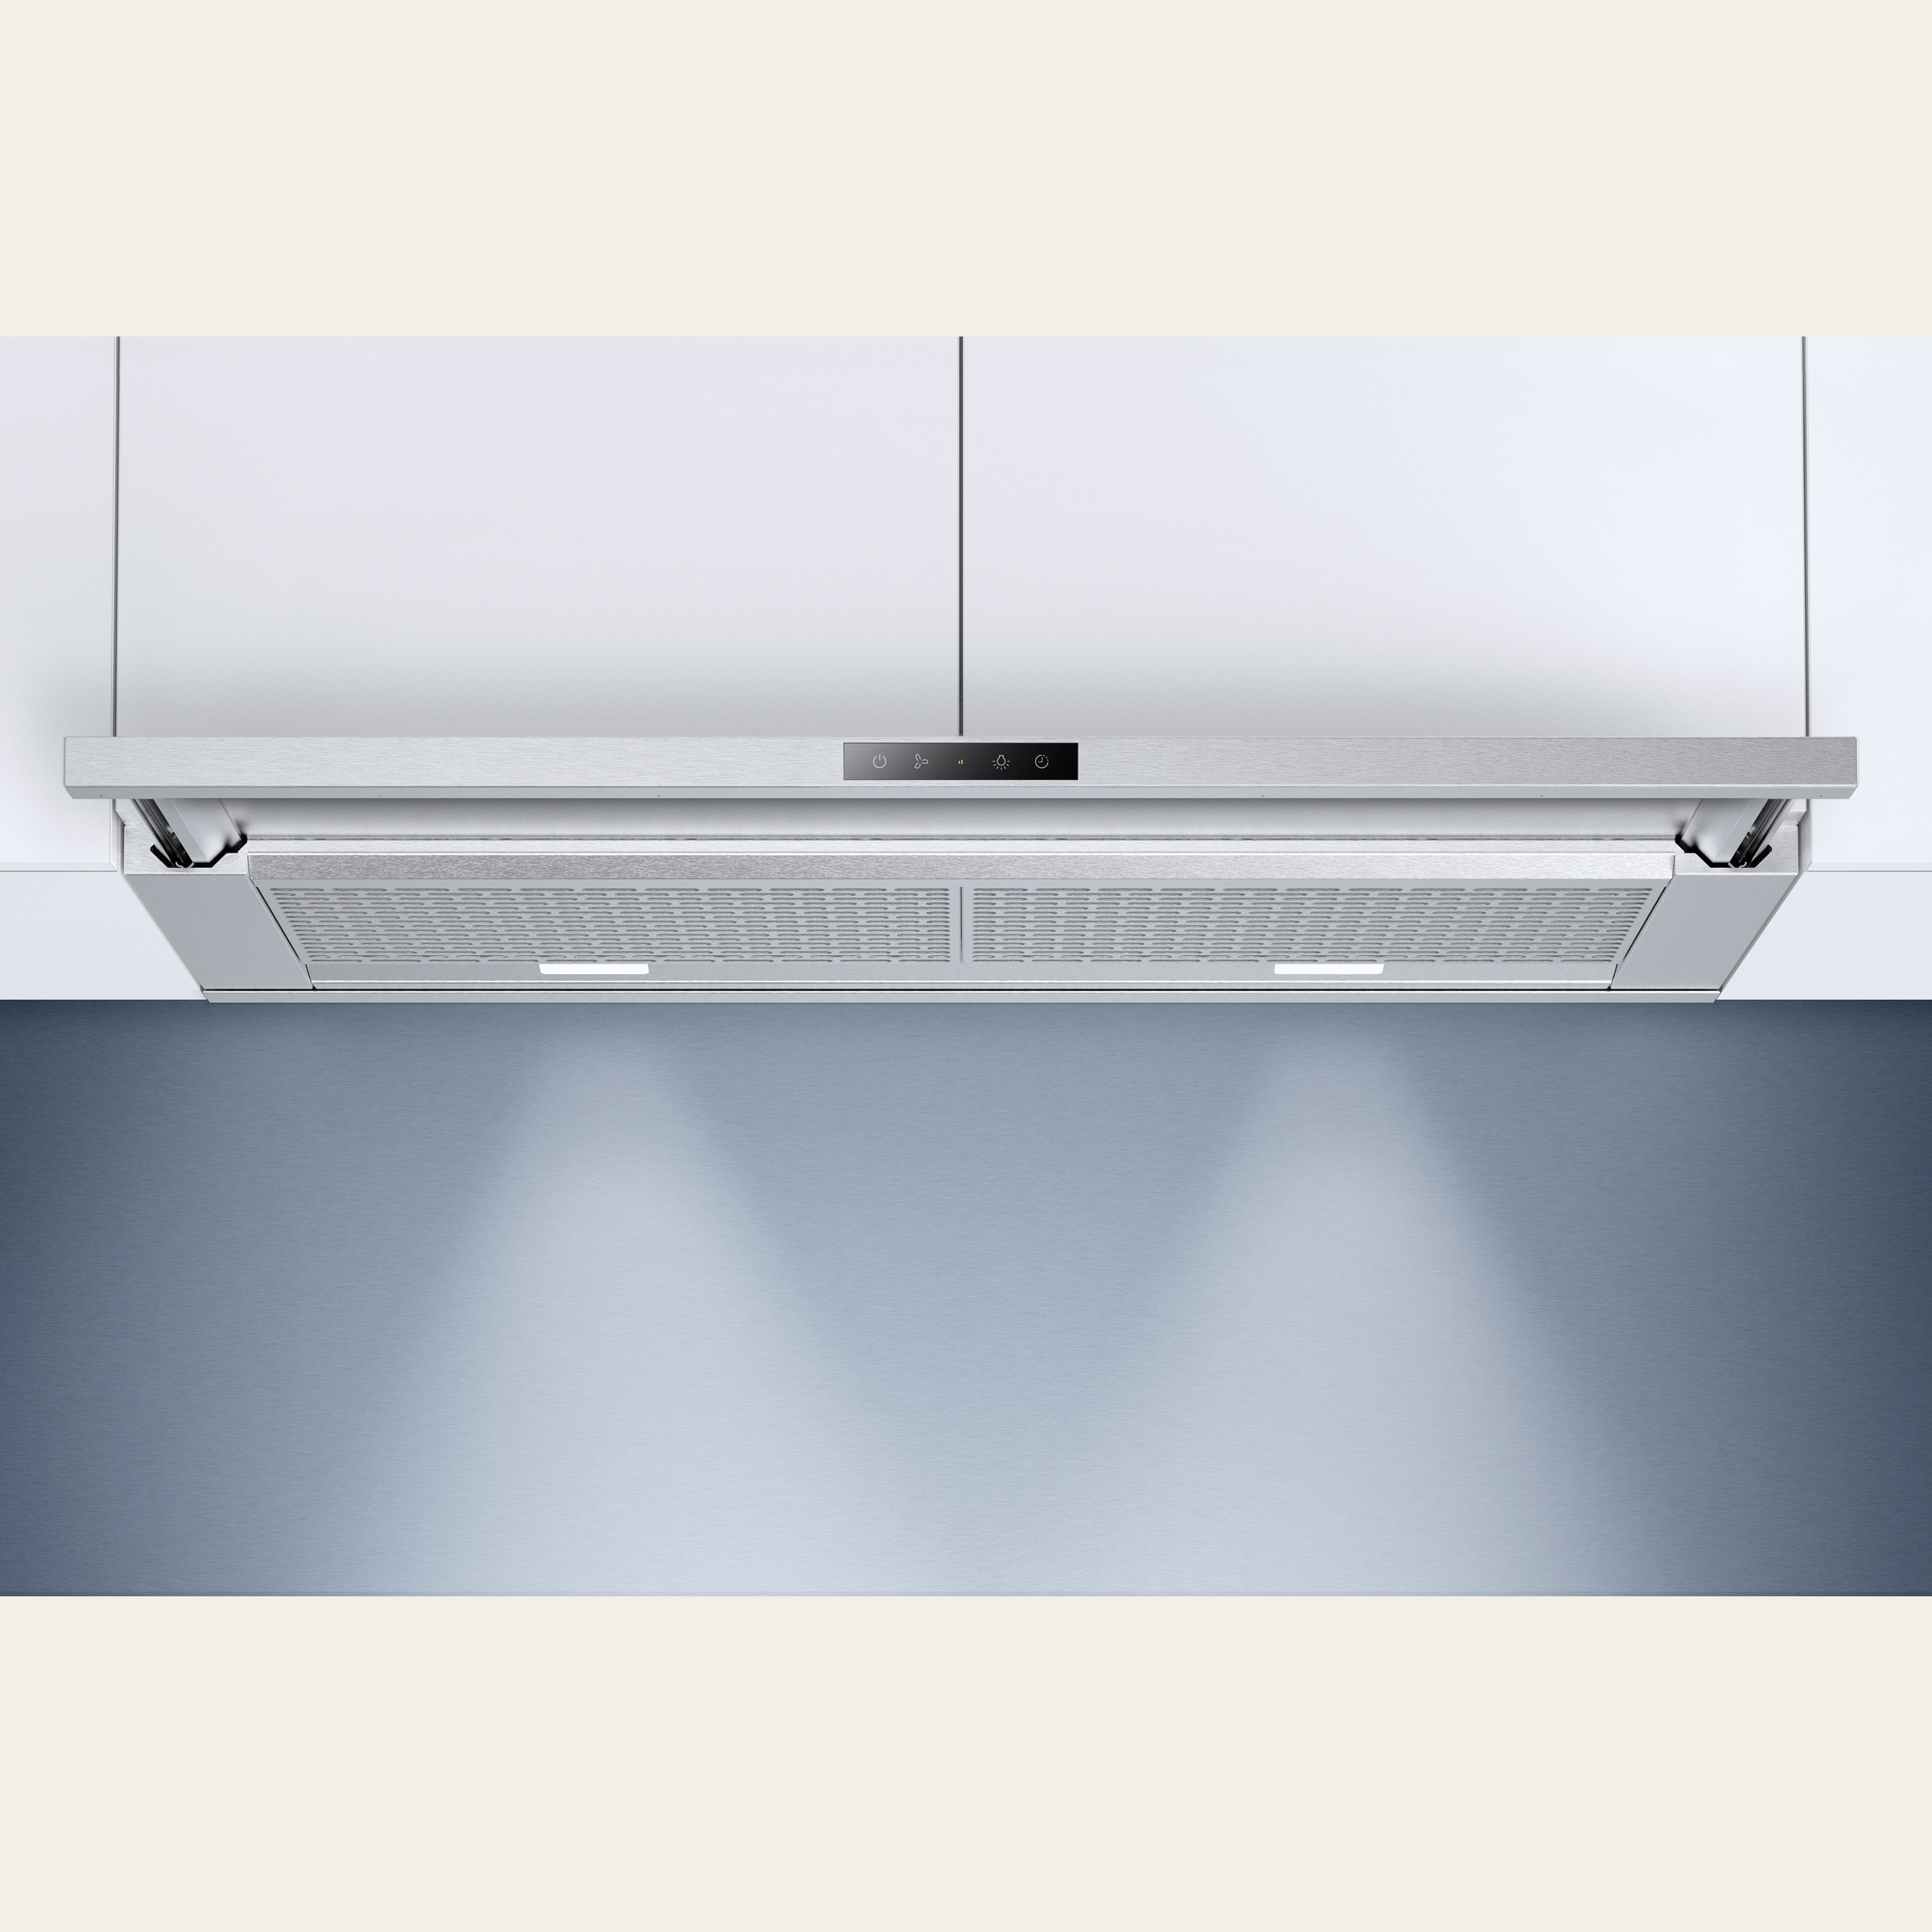 V-ZUG Range hood, AiroClearCabinet V6000, Standard width: 90.0 cm, ChromeClass, OptiLink, Energy efficiency rating: A+, Extracted air, TouchControl, integrated range hood, flat pullout